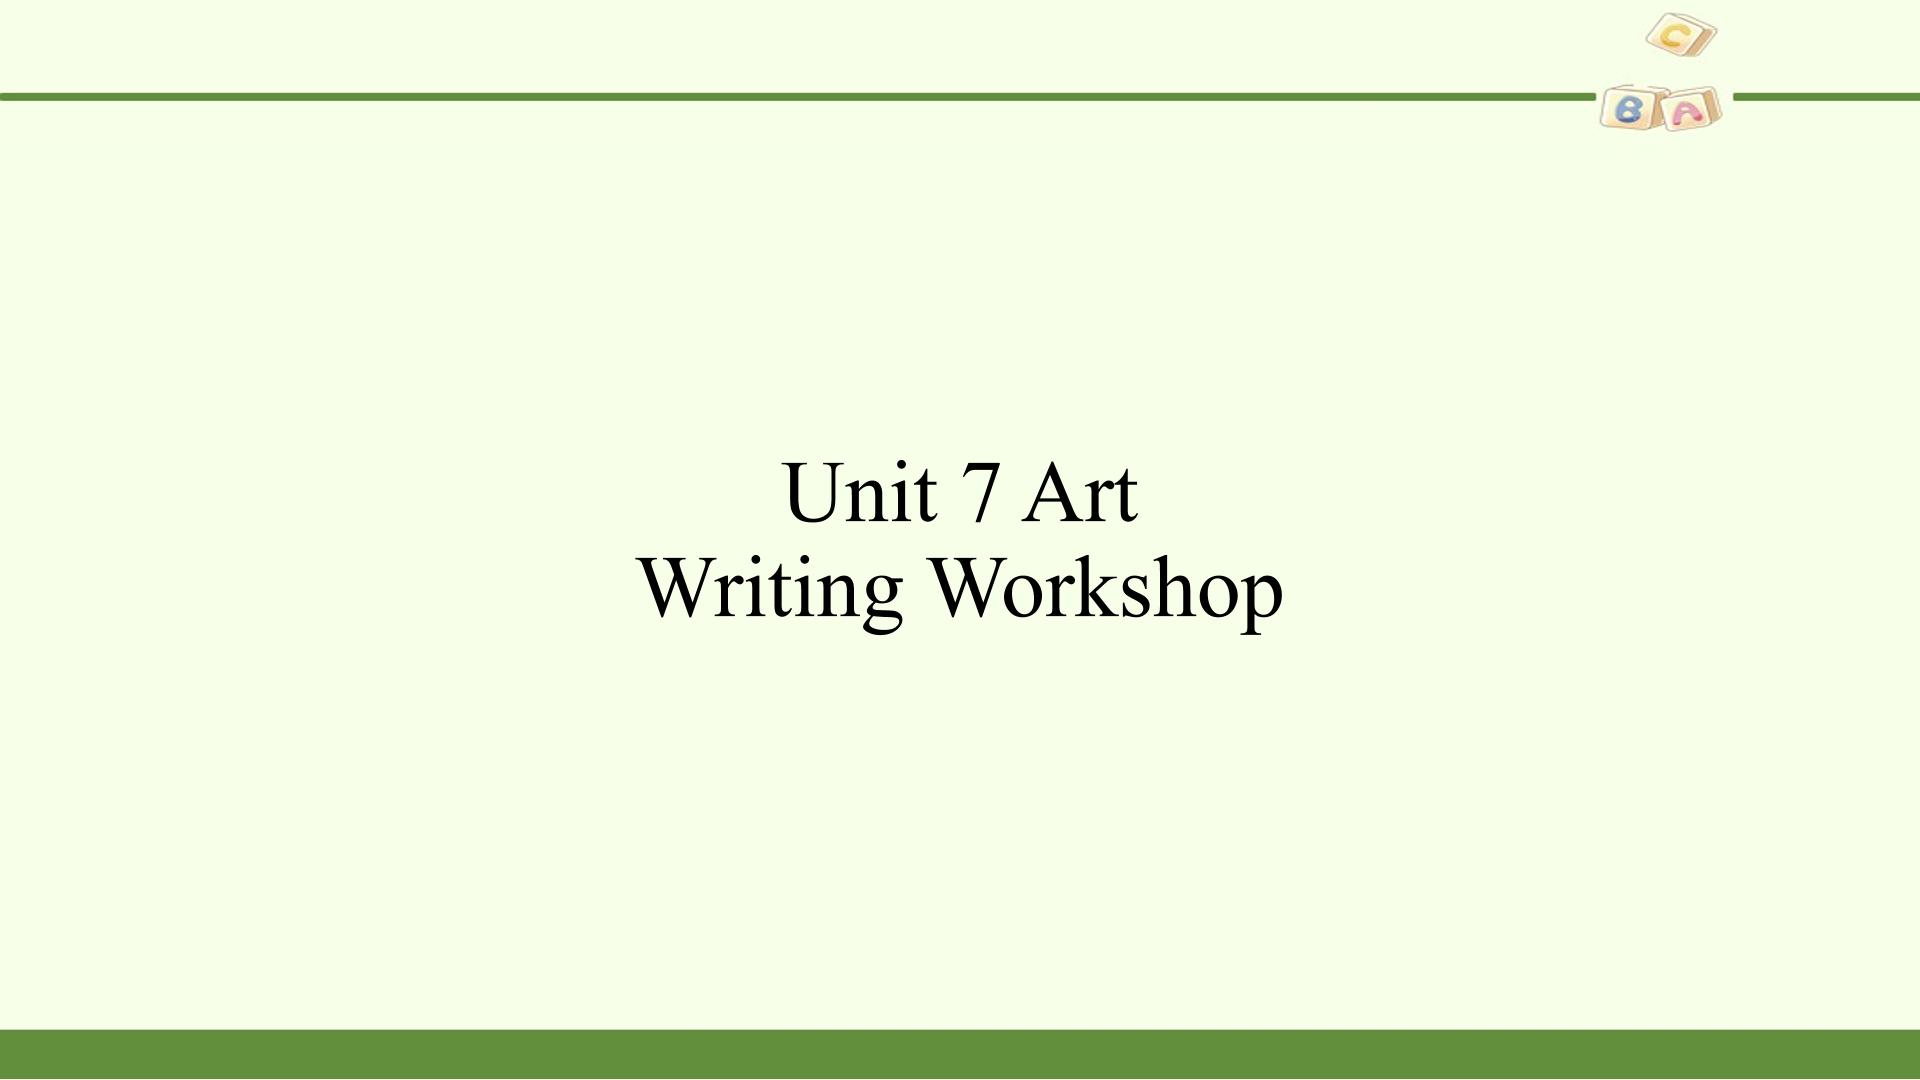 Writing Workshop—A Formal Email